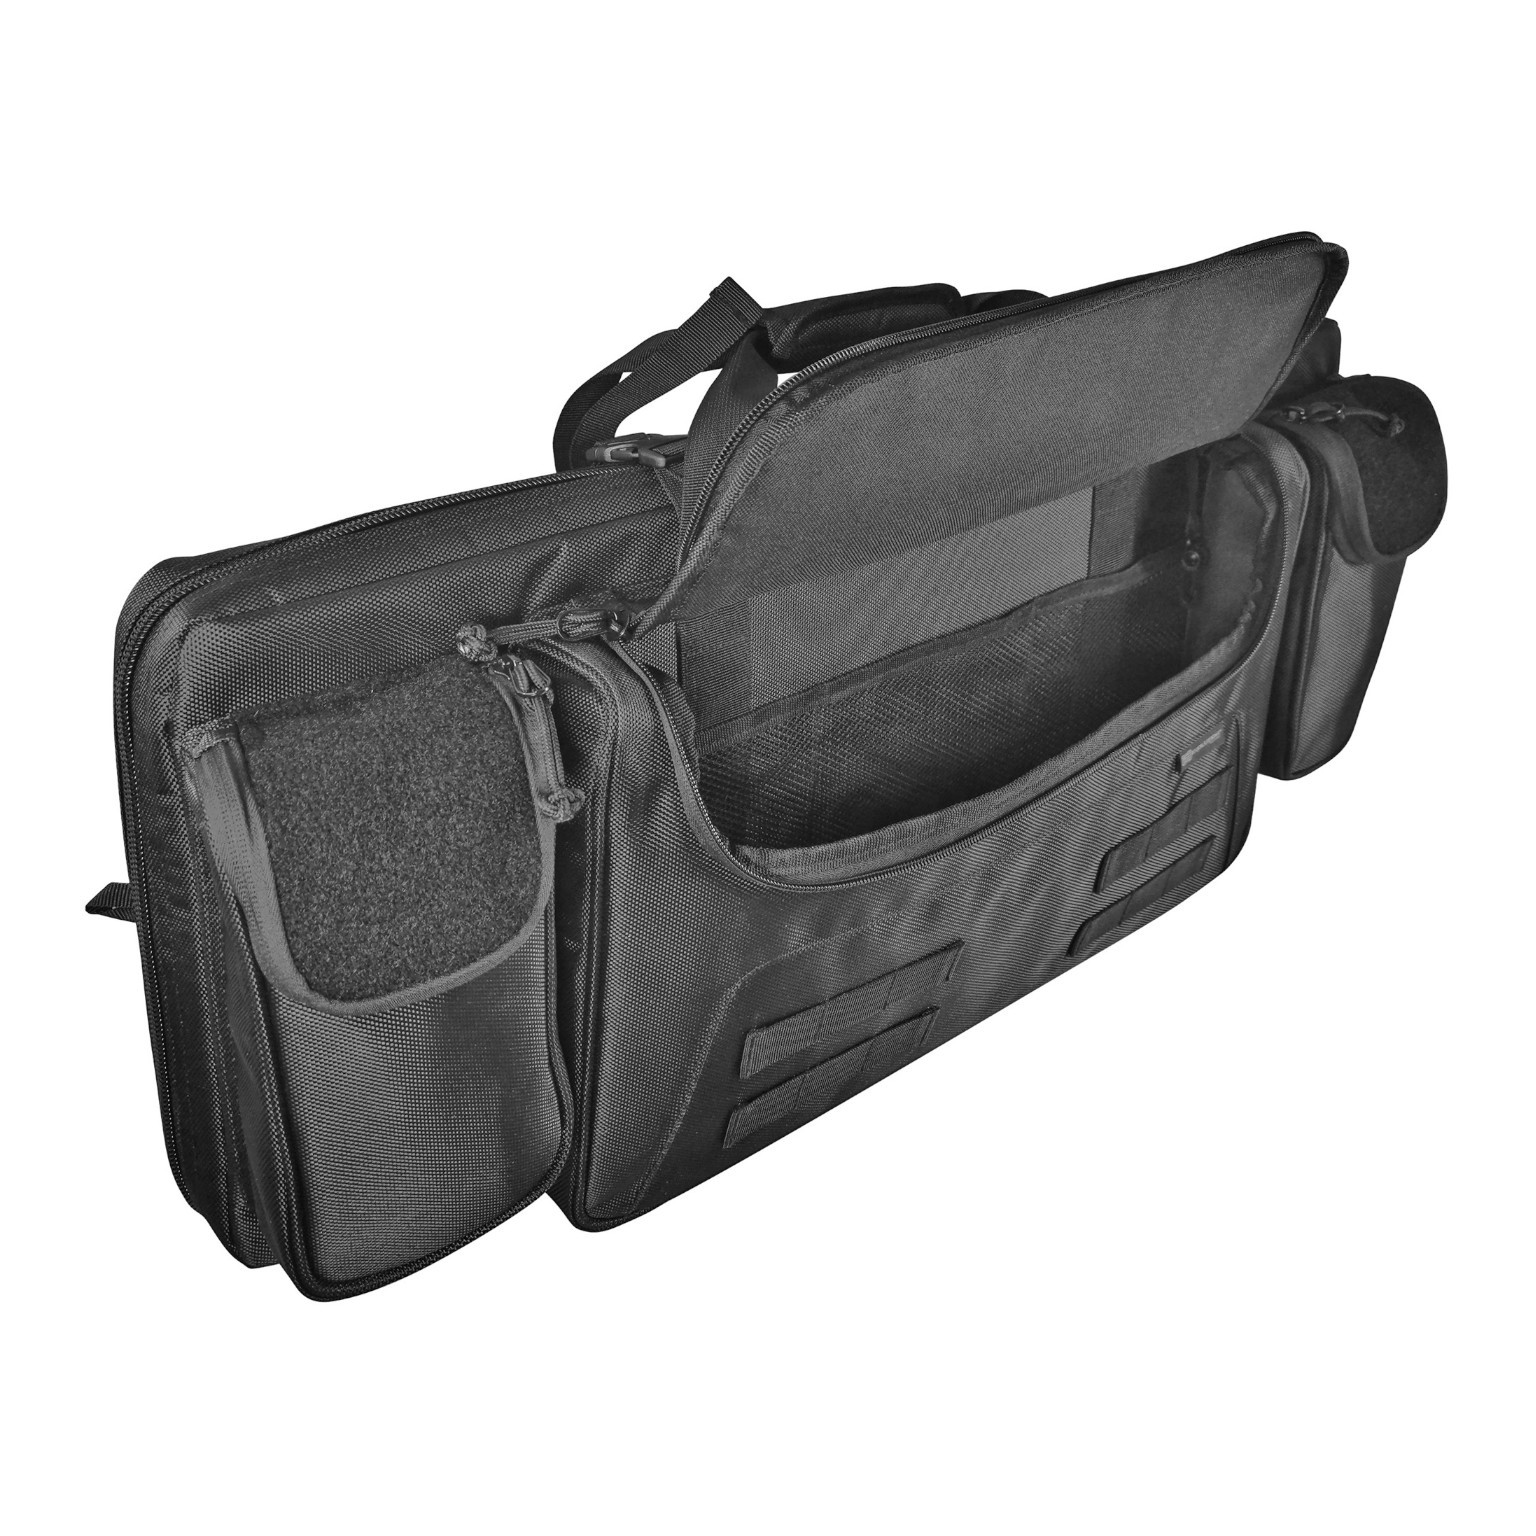 Ruger Page Messenger Bag, Gray, by Allen Company